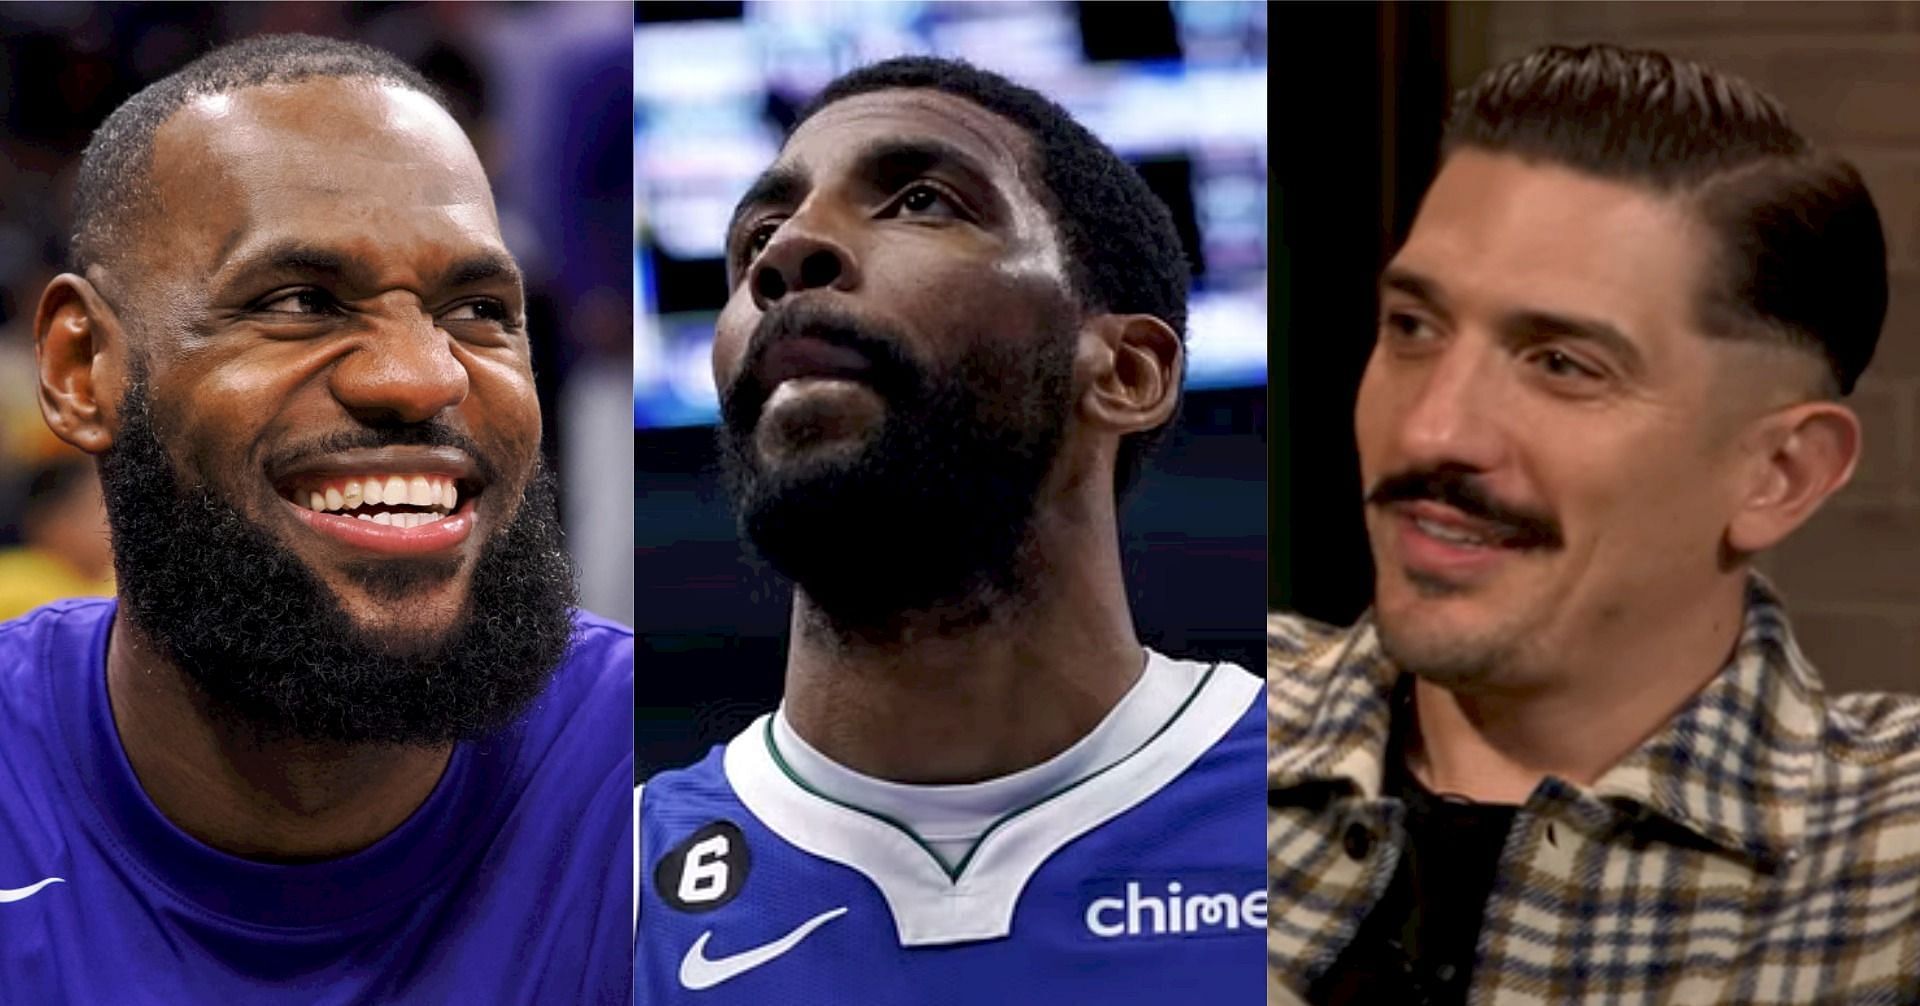 NBA stars LeBron James and Kyrie Irving and comedian Andrew Schulz